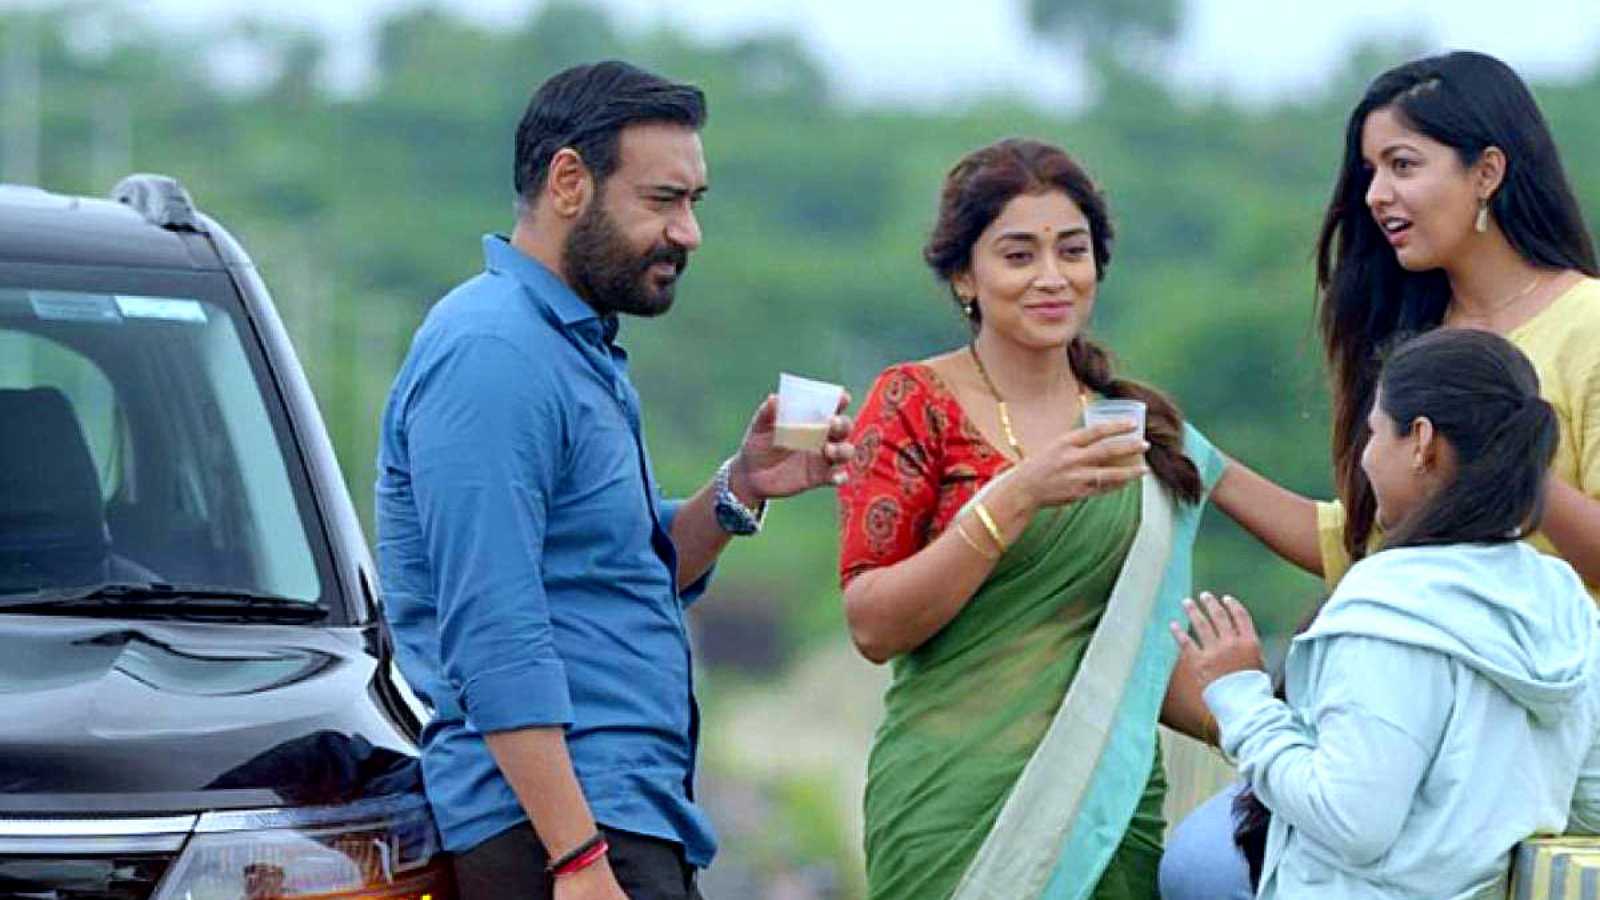 Drishyam 2 becomes one of Ajay Devgn's biggest box office openers of all time, Tabu beats her own 2022 record with the film